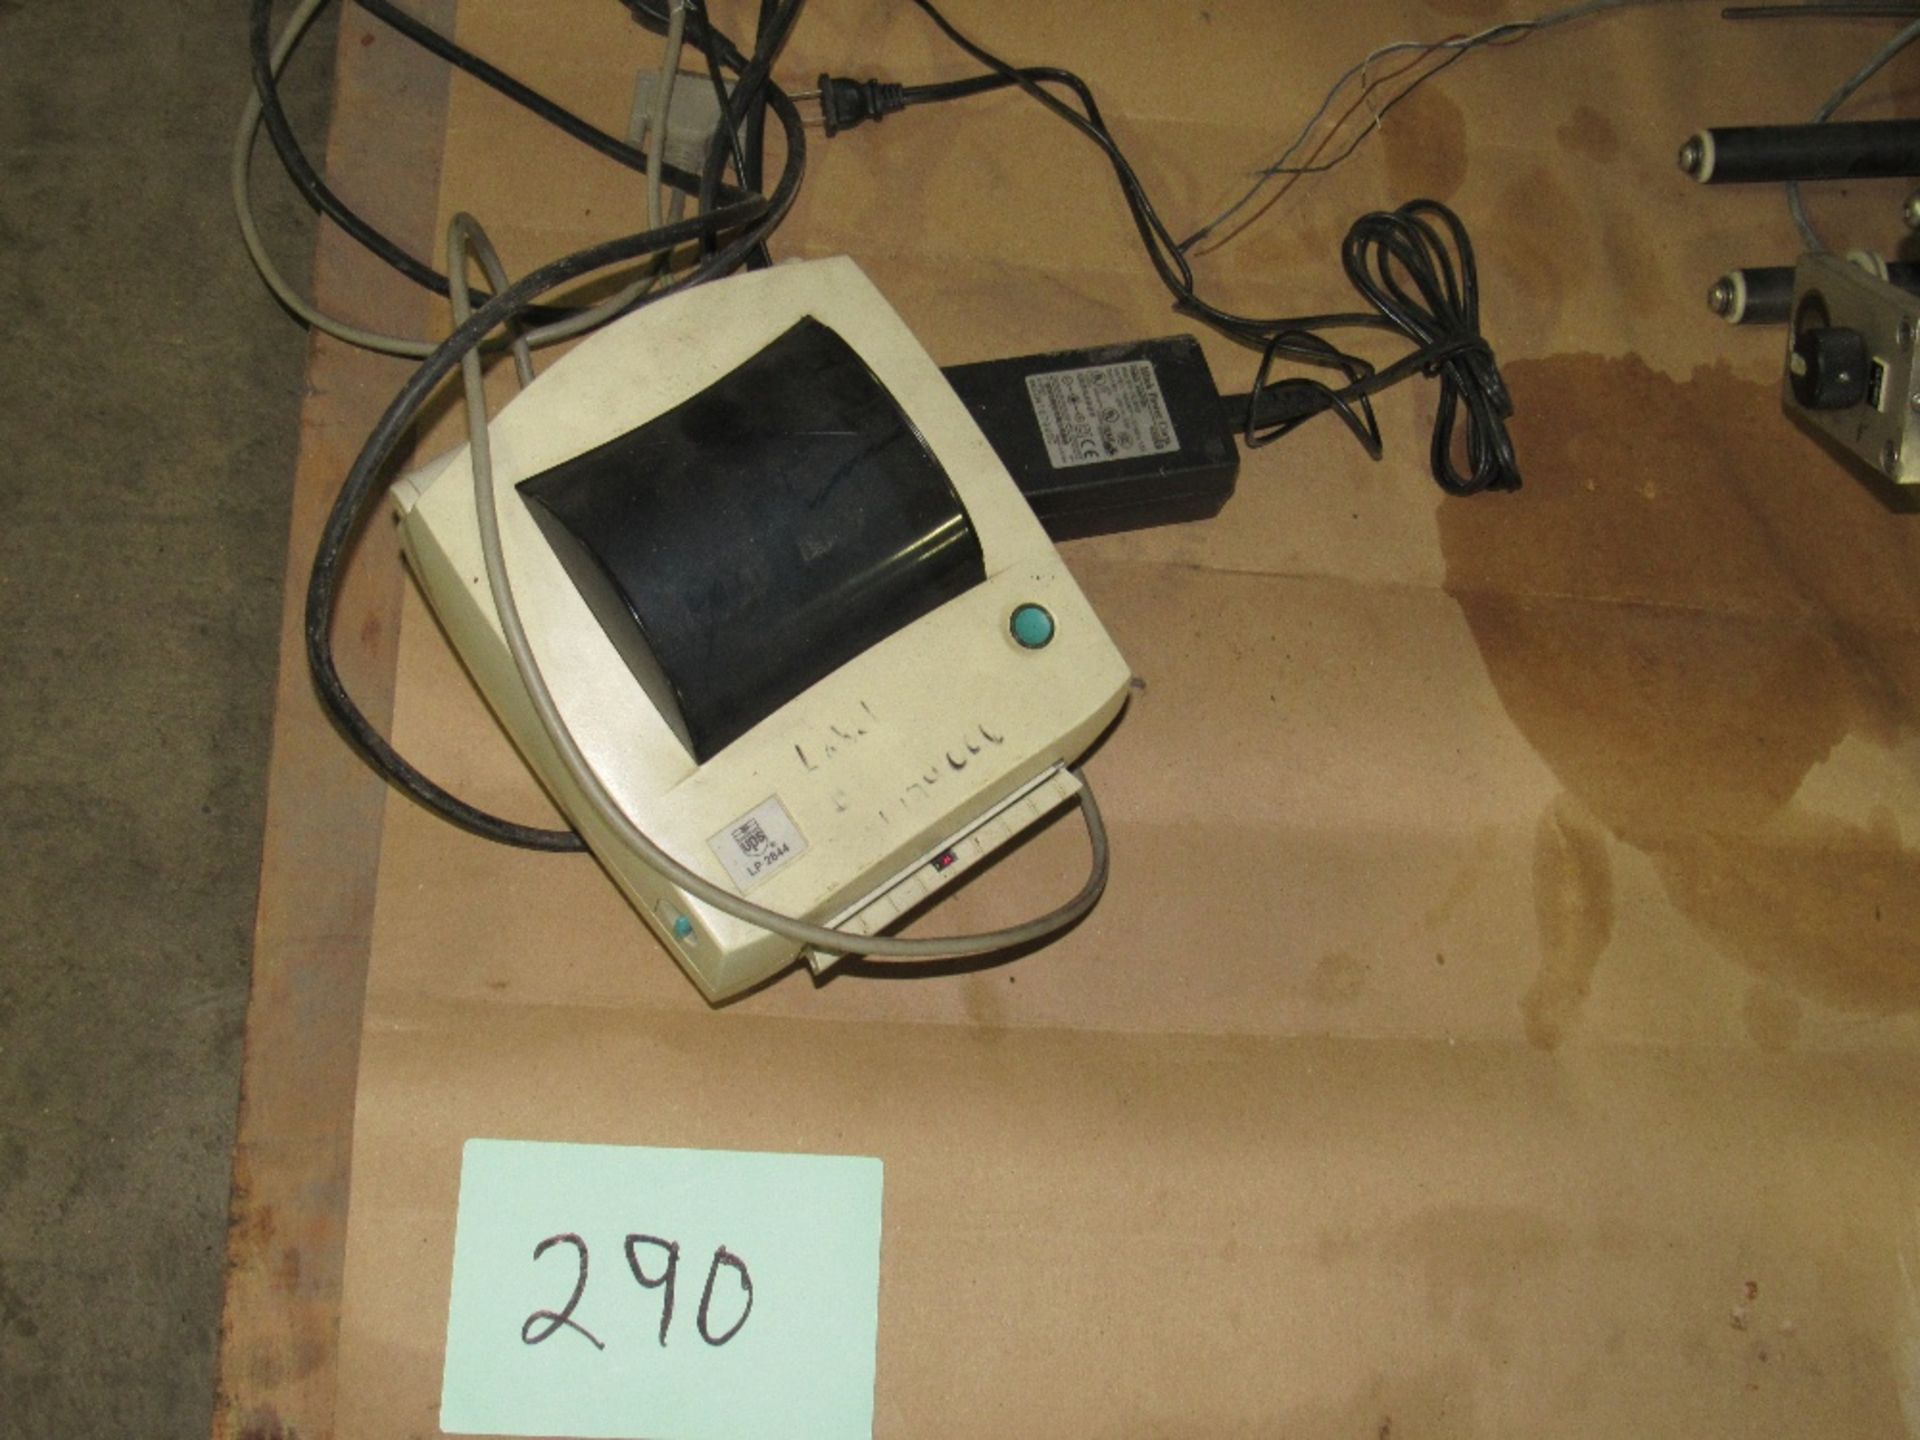 UPS Line Label Printer Model LP2844. Free Removal and Loading included in the price.